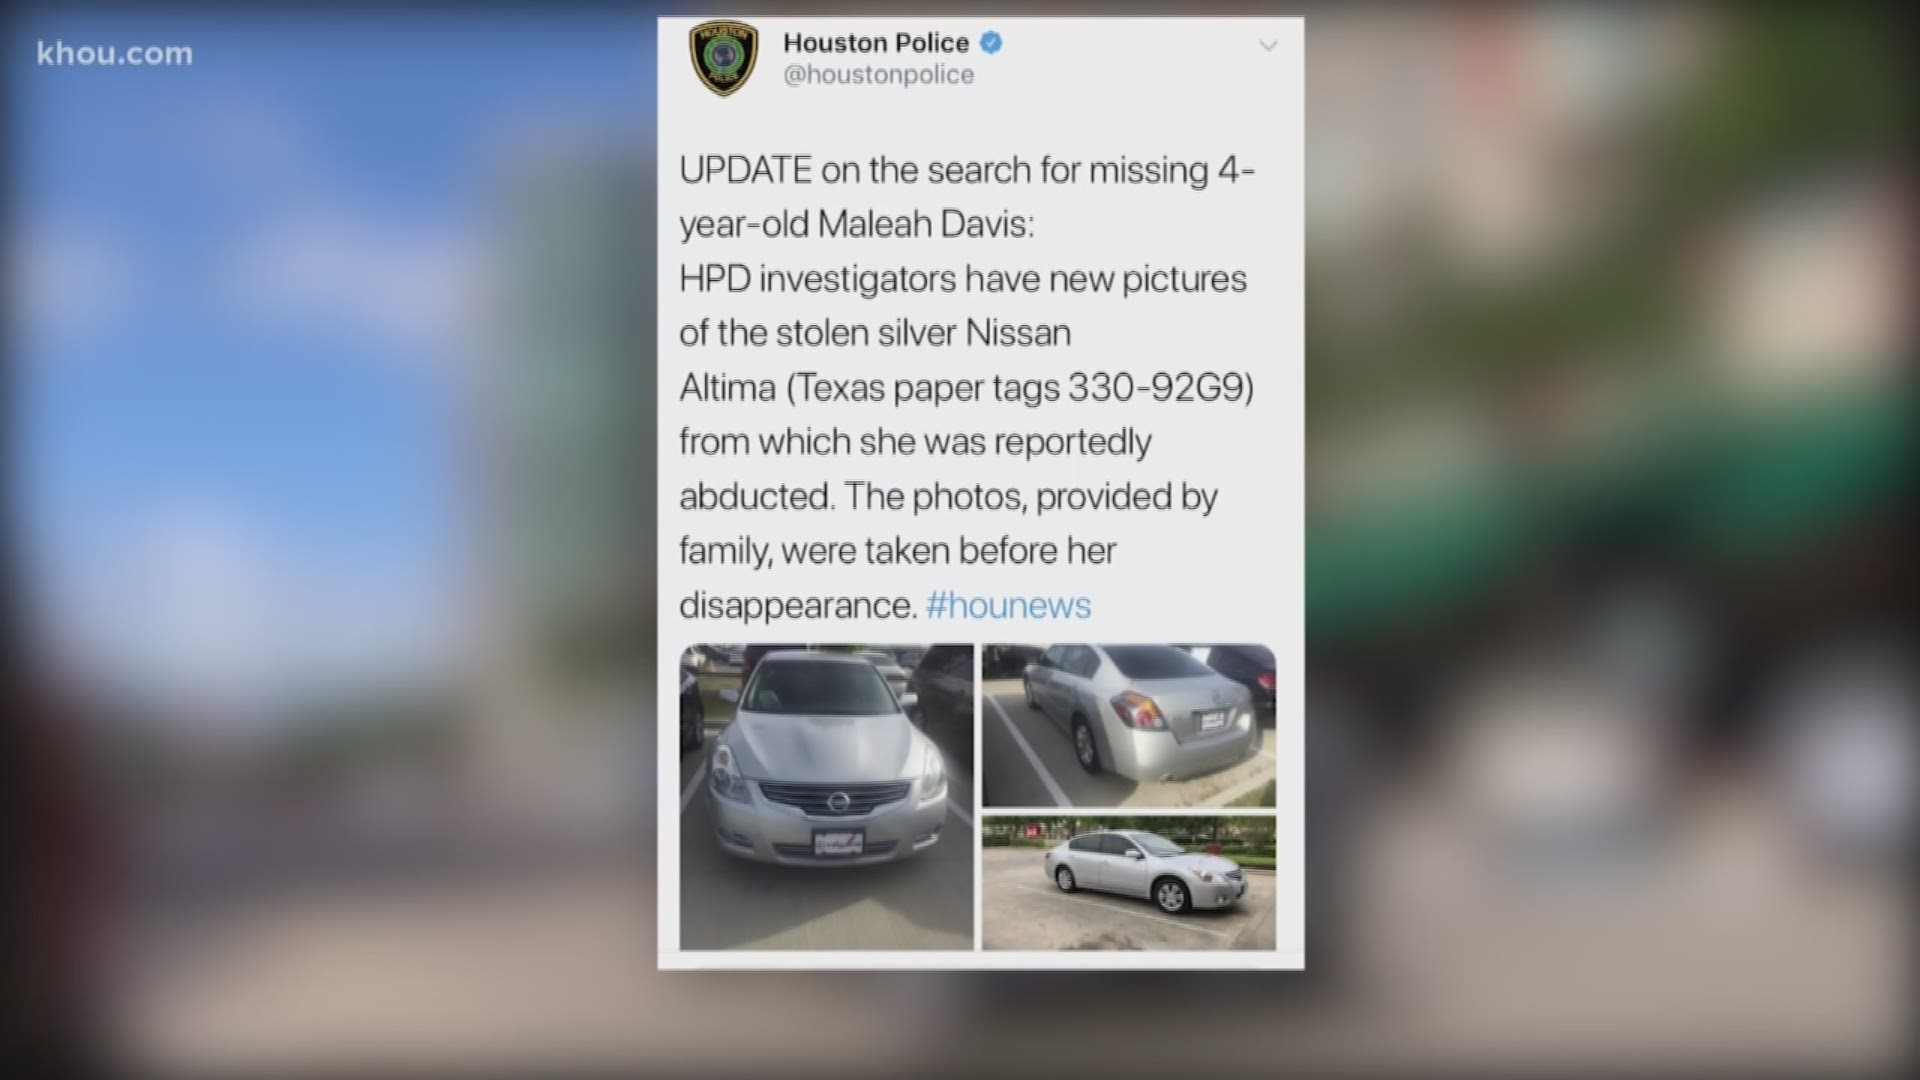 Police have released new photos of the car tied to the disappearance of 4-year-old Meleah Davis and police want you to be on the lookout for it.